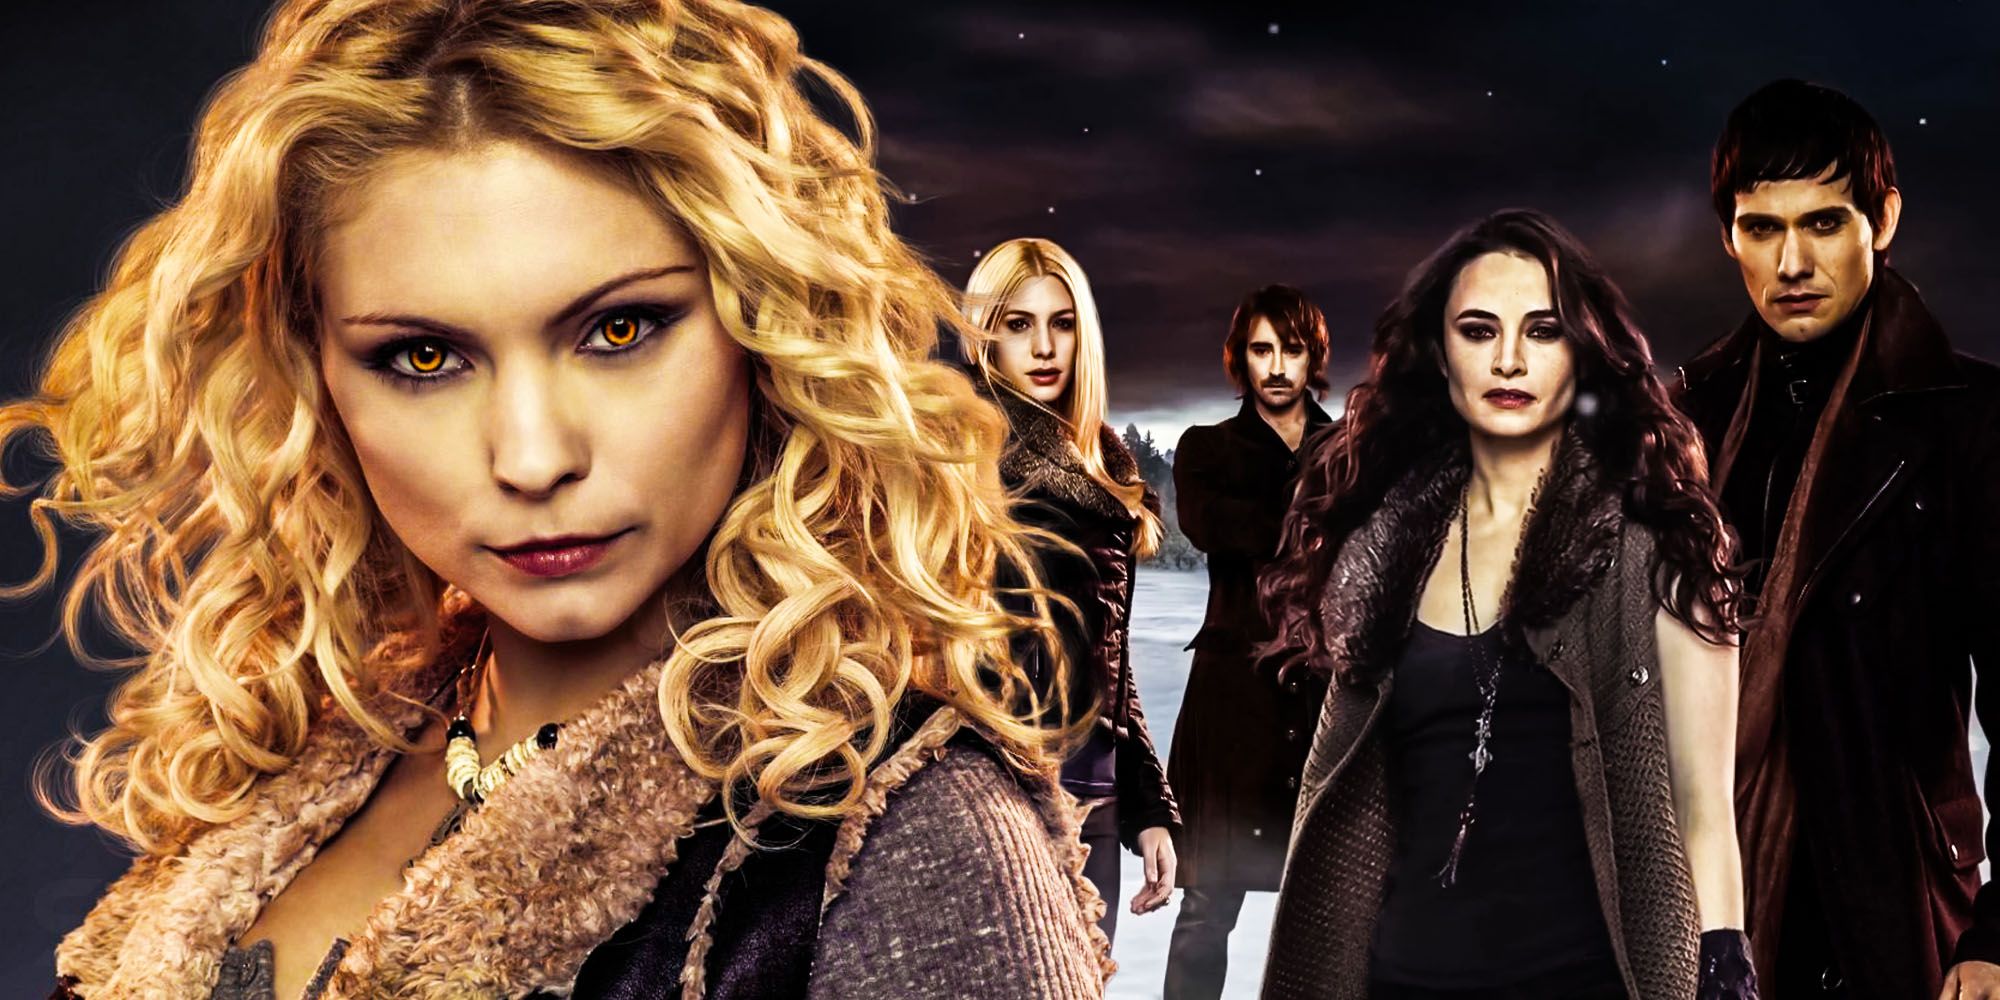 The Denali Coven play a major role in setting up the climax of the Twilight saga